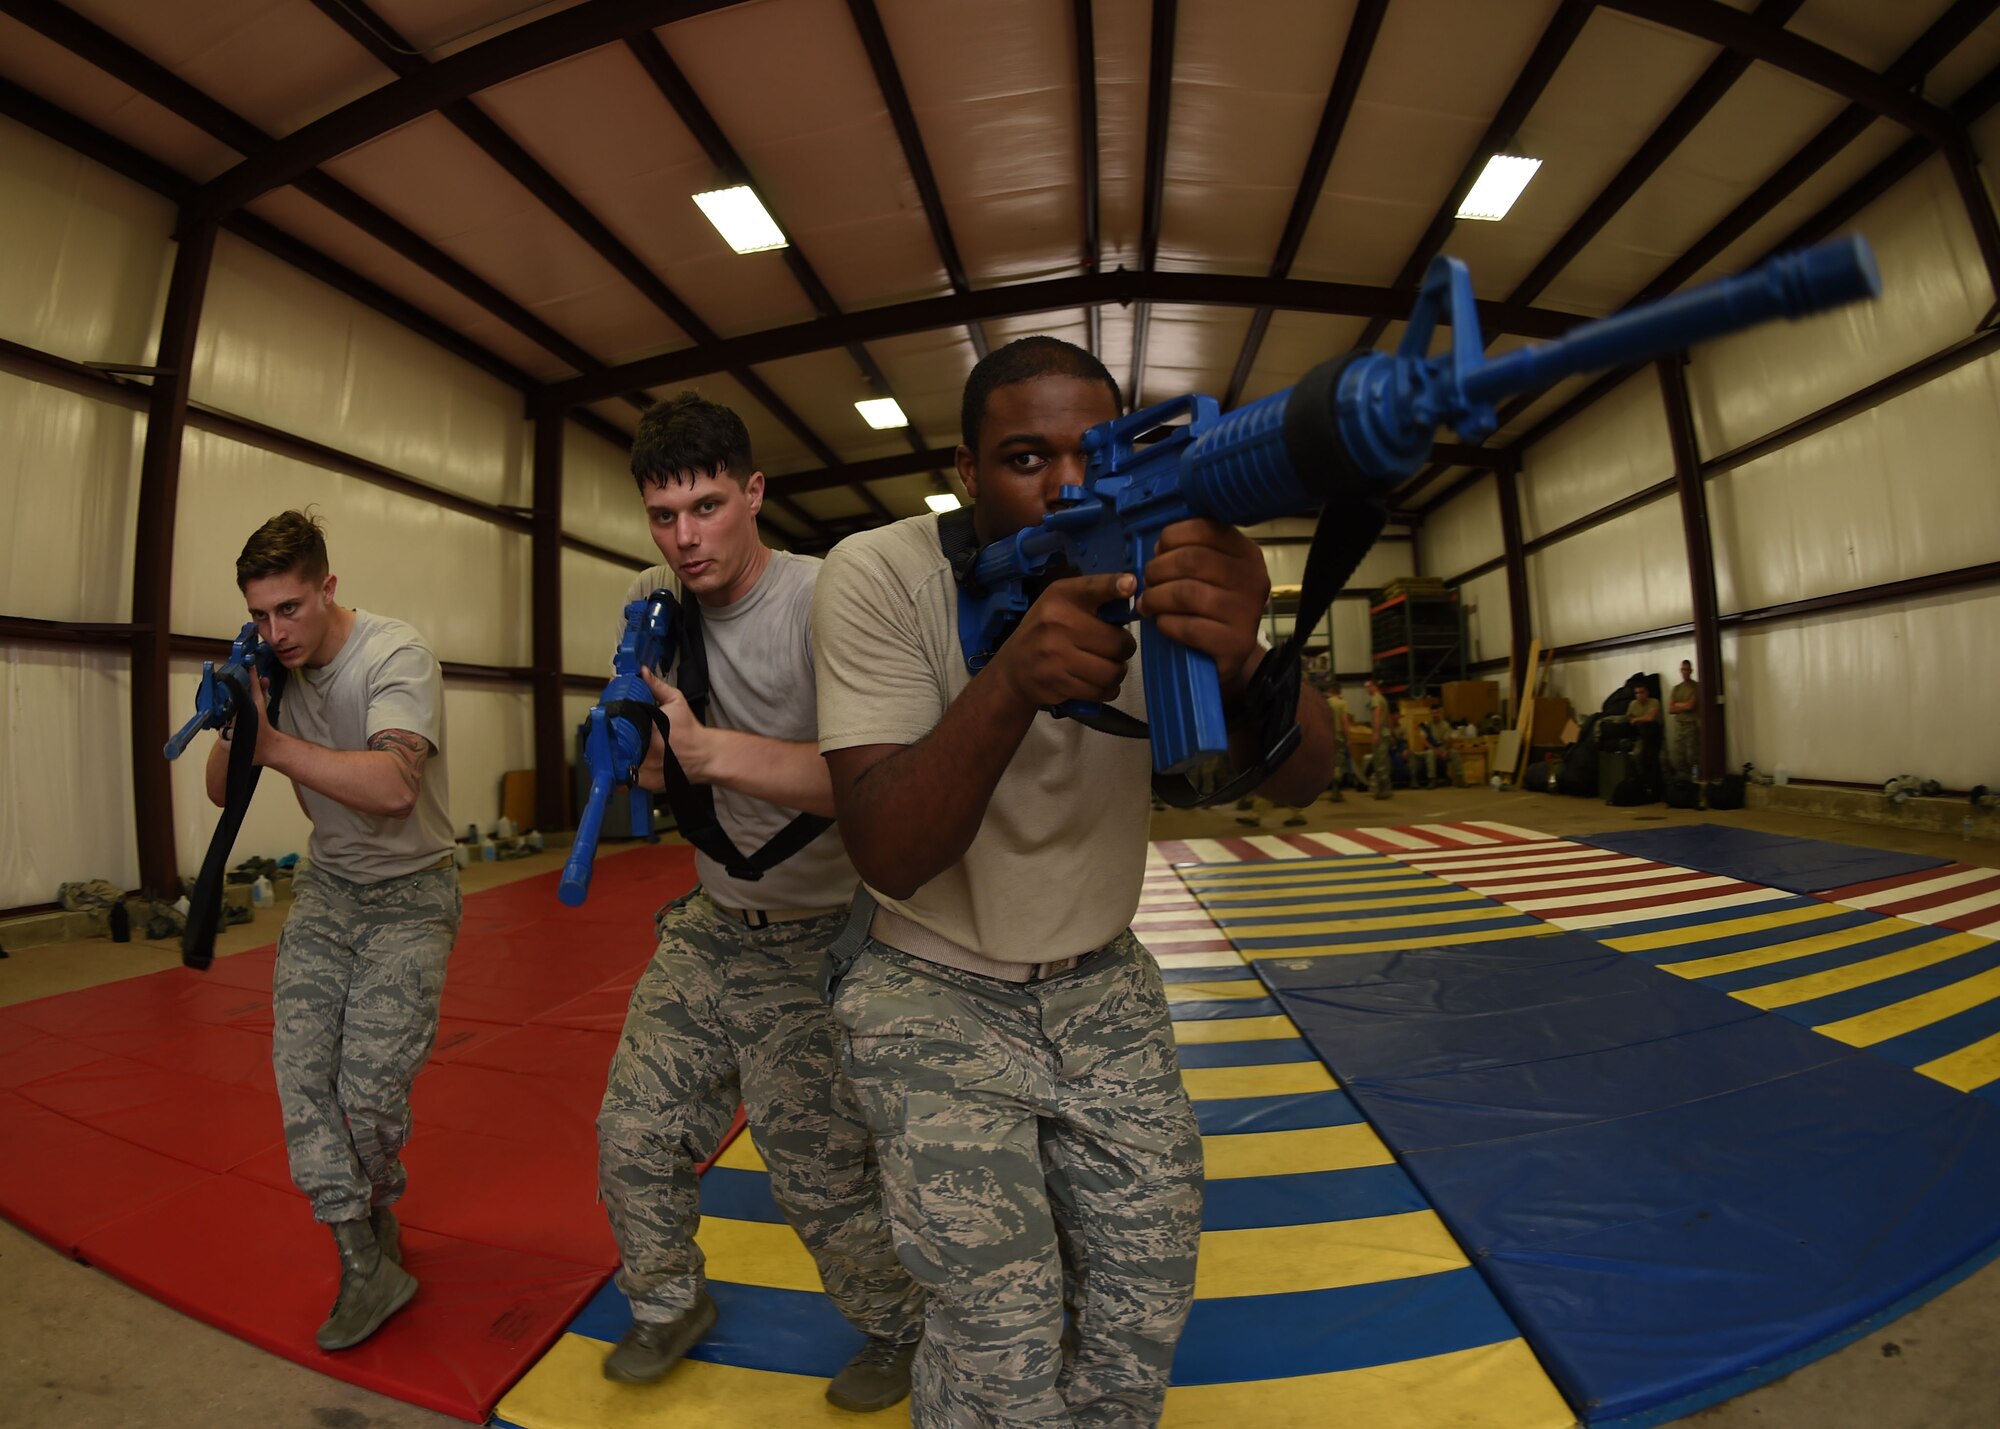 Members of the 97th Security Forces Squadron practice tactical movements on Sept. 13, 2016, Altus Air Force Base, Okla. 97th SFS Airmen participated in a week-long training course that taught hand-to-hand defensive and subduing techniques, weapons handling and clearing and securing buildings, aircraft and buses as a team. (U.S. Air Force photo by Airman 1st Class Kirby Turbak/Released)   